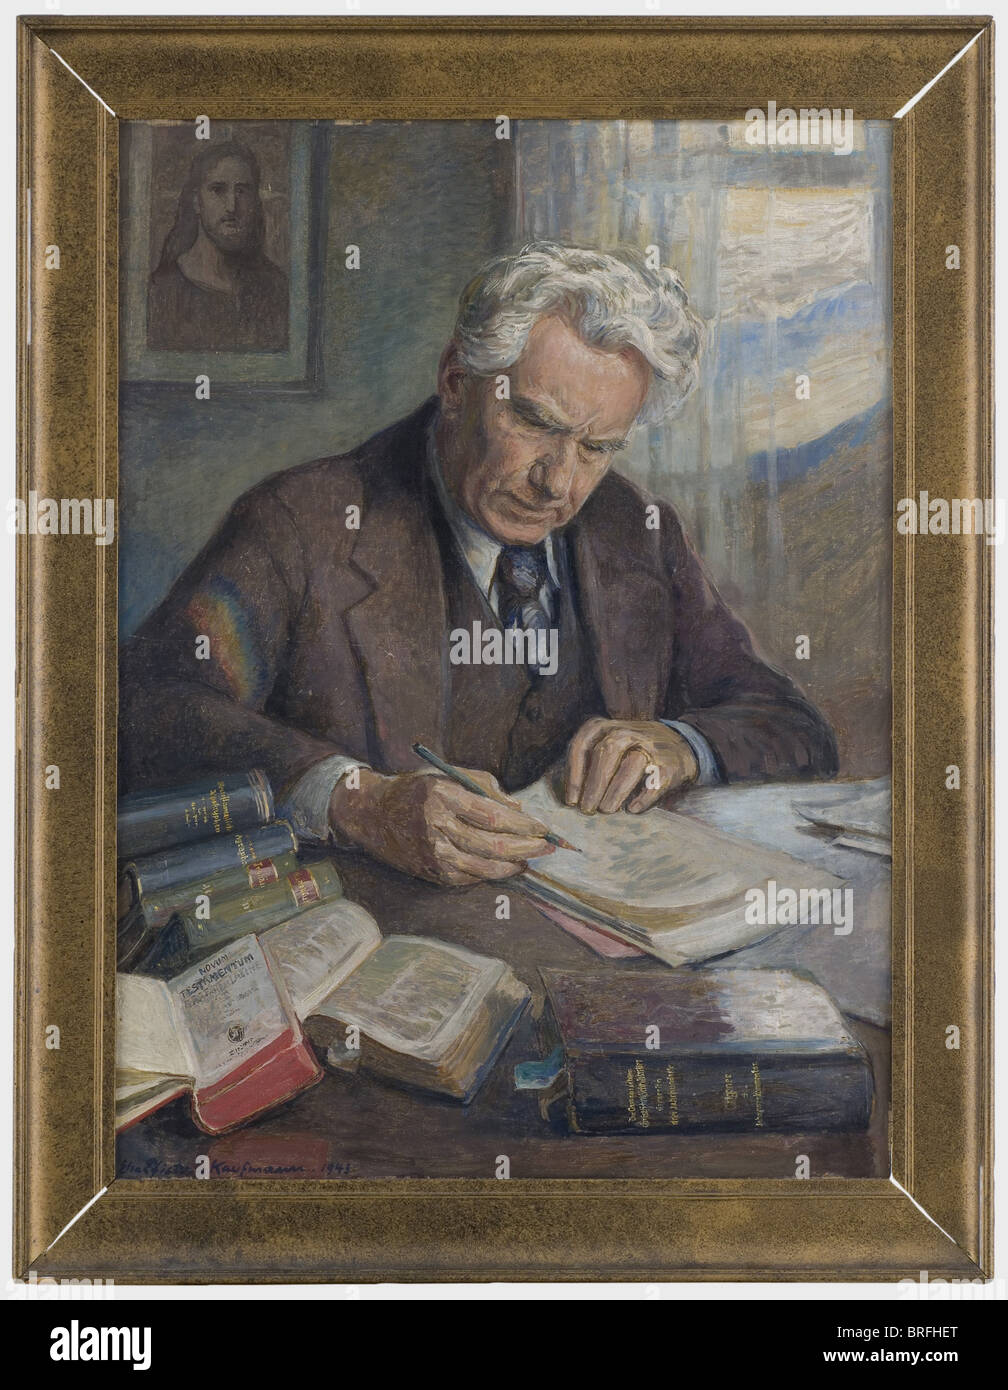 Artur Dinter - a portrait painting 1943., Oil on cardboard. Dinter at a desk. Signed on lower left 'Elsa Pfister-Kaufmann 1943'. Picture size 62 x 85, framed 79 x 100 cm. The frame with some imperfections. people, 1930s, 20th century, NS, National Socialism, Nazism, Third Reich, German Reich, Germany, German, National Socialist, Nazi, Nazi period, fascism, object, objects, stills, clipping, clippings, cut out, cut-out, cut-outs, painting, paintings, fine arts, art, picture, pictures, illustrations, man, men, male, Stock Photo